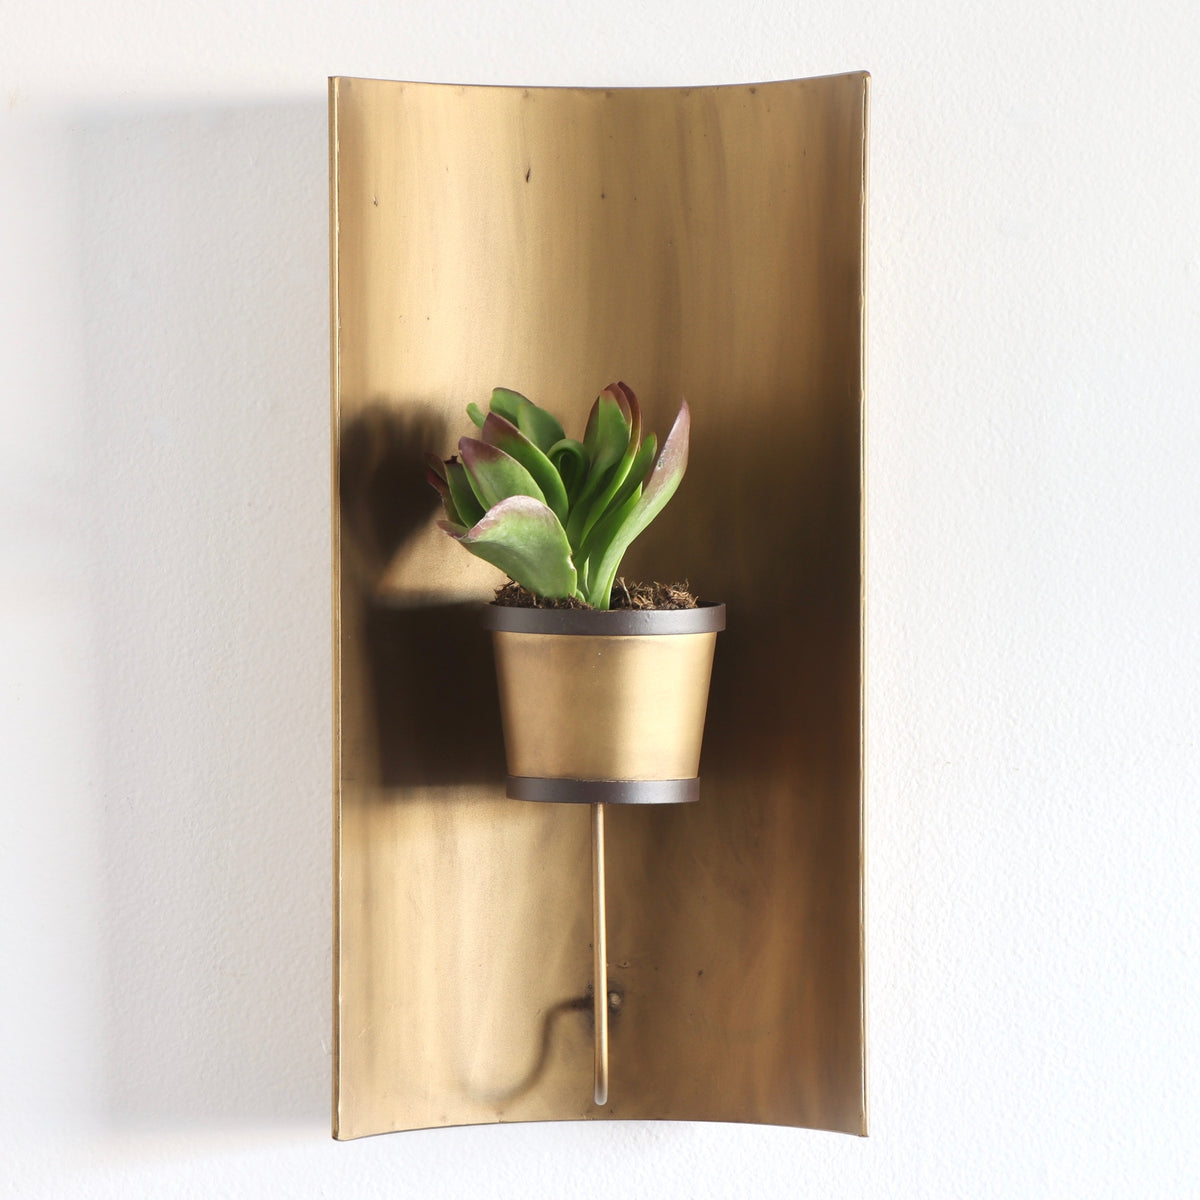 Curved Antique Brass Finished Wall Planter - Holistic Habitat 